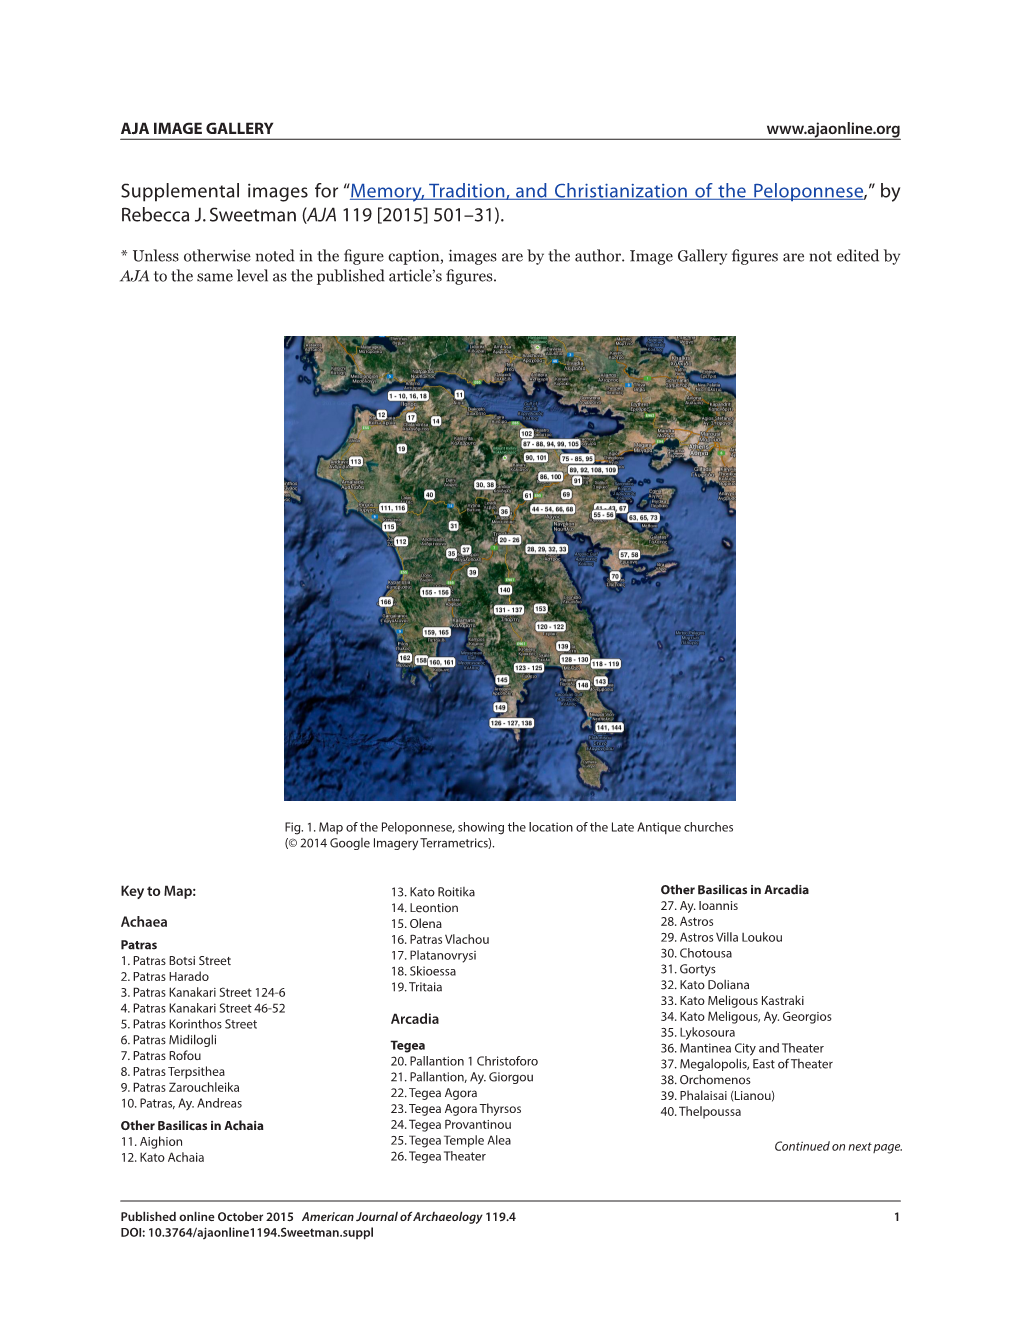 Memory, Tradition, and Christianization of the Peloponnese,” by Rebecca J